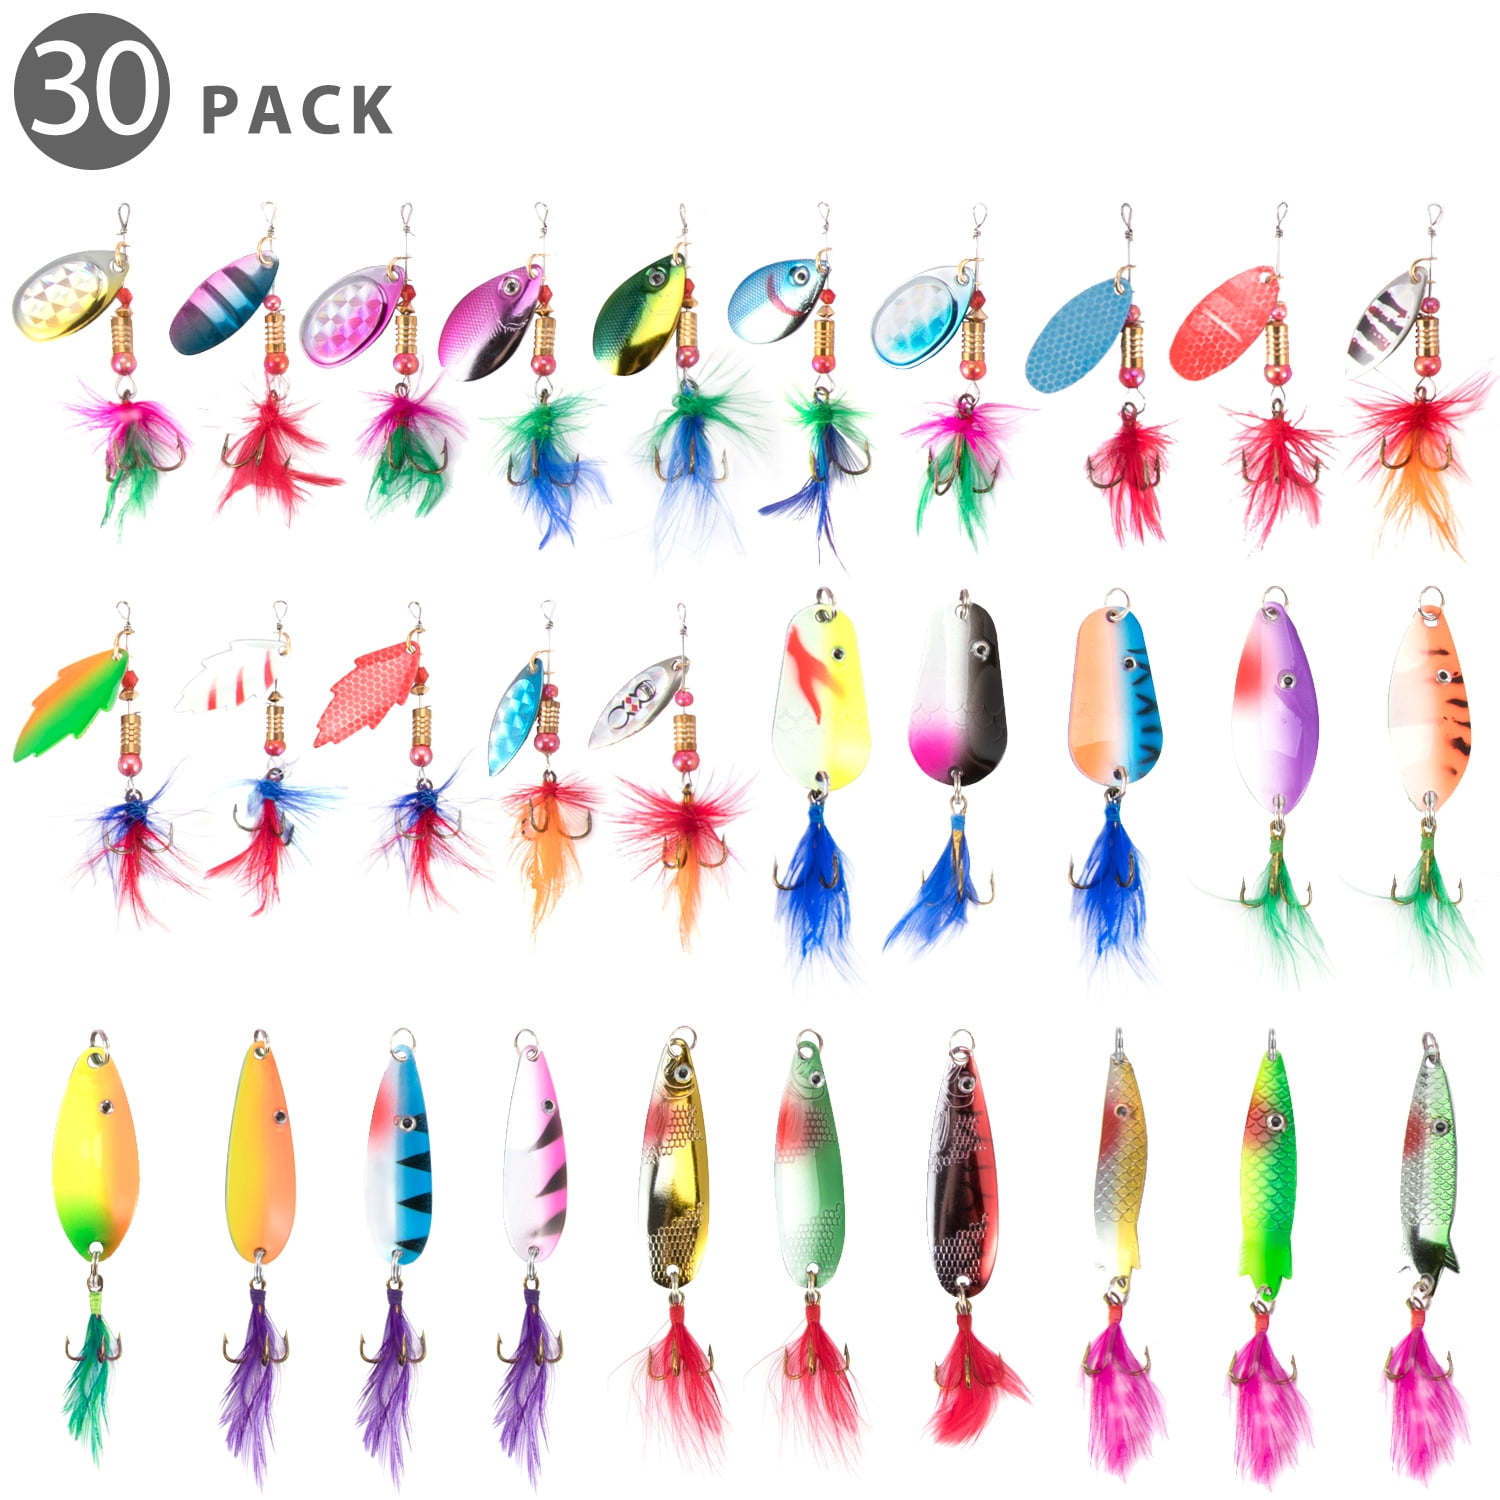 Flexzion Fishing Lures SpinnerBaits for Bass Lures Salmon Trout Colorado Blades Fishing 30pc Rooster Tail Willow Blades Assorted Fishing Gear Metal Hard Freshwater Saltwater Lure Spinner Baits